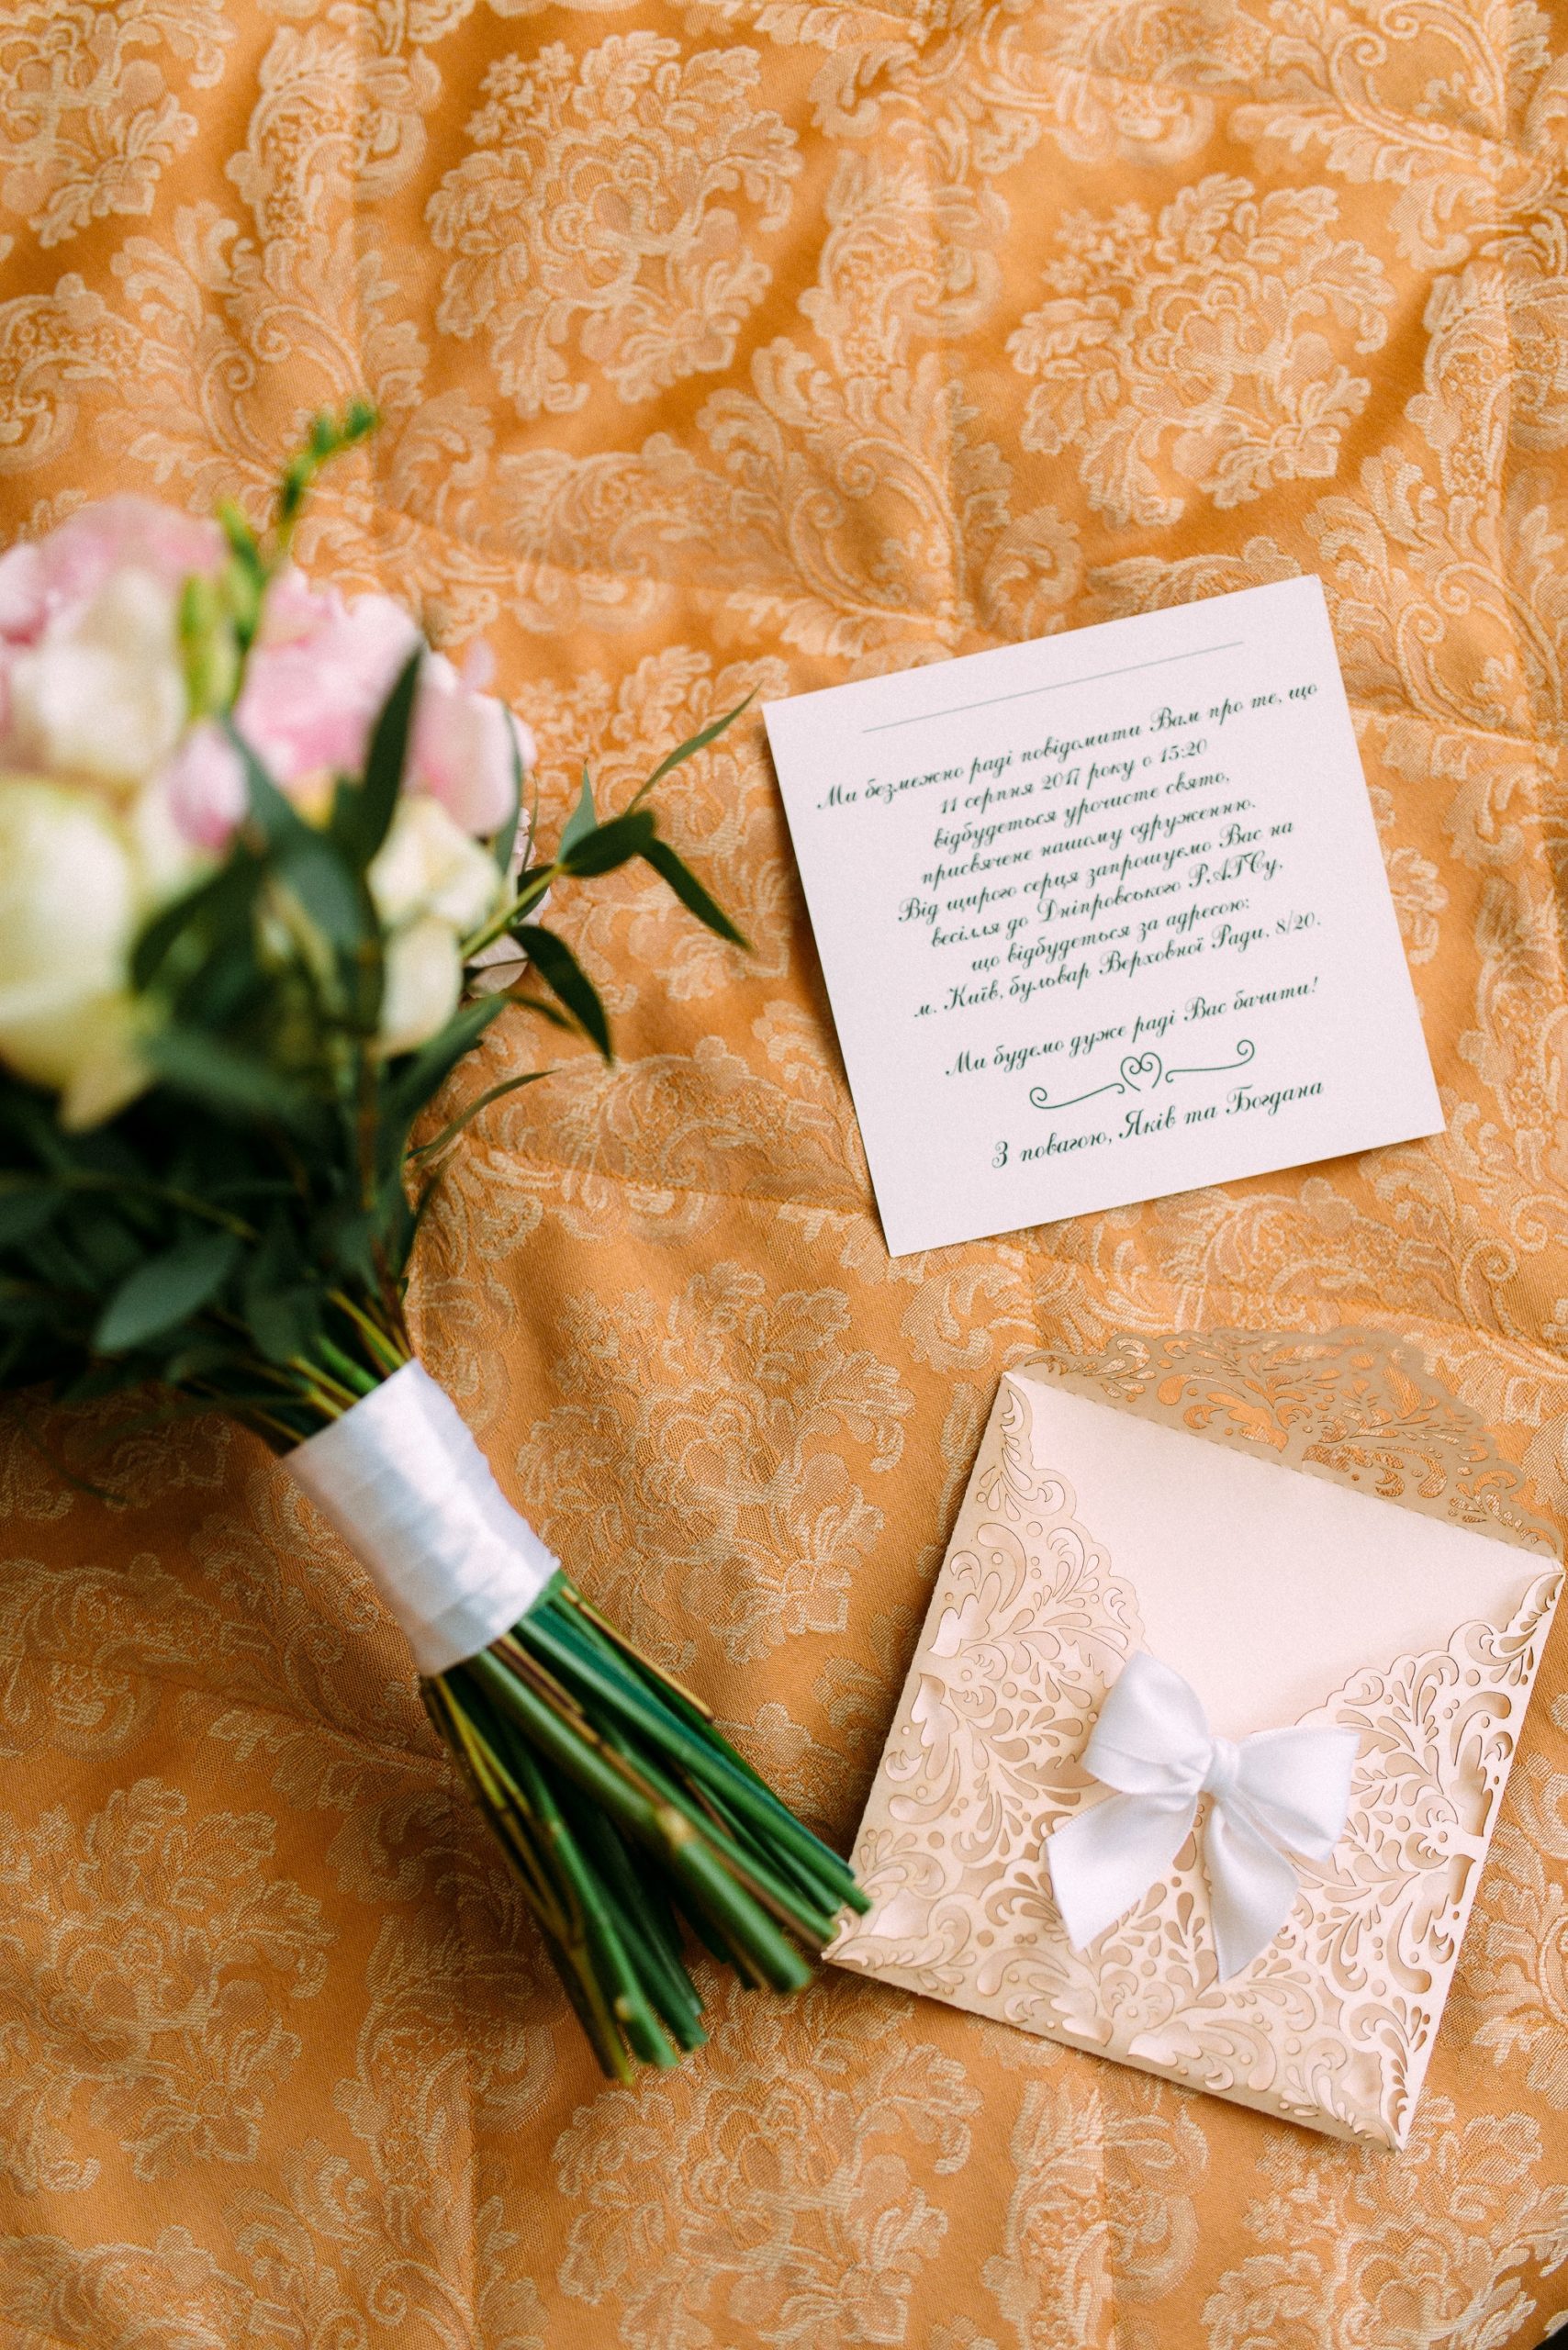 wedding invitation and flowers on a bed